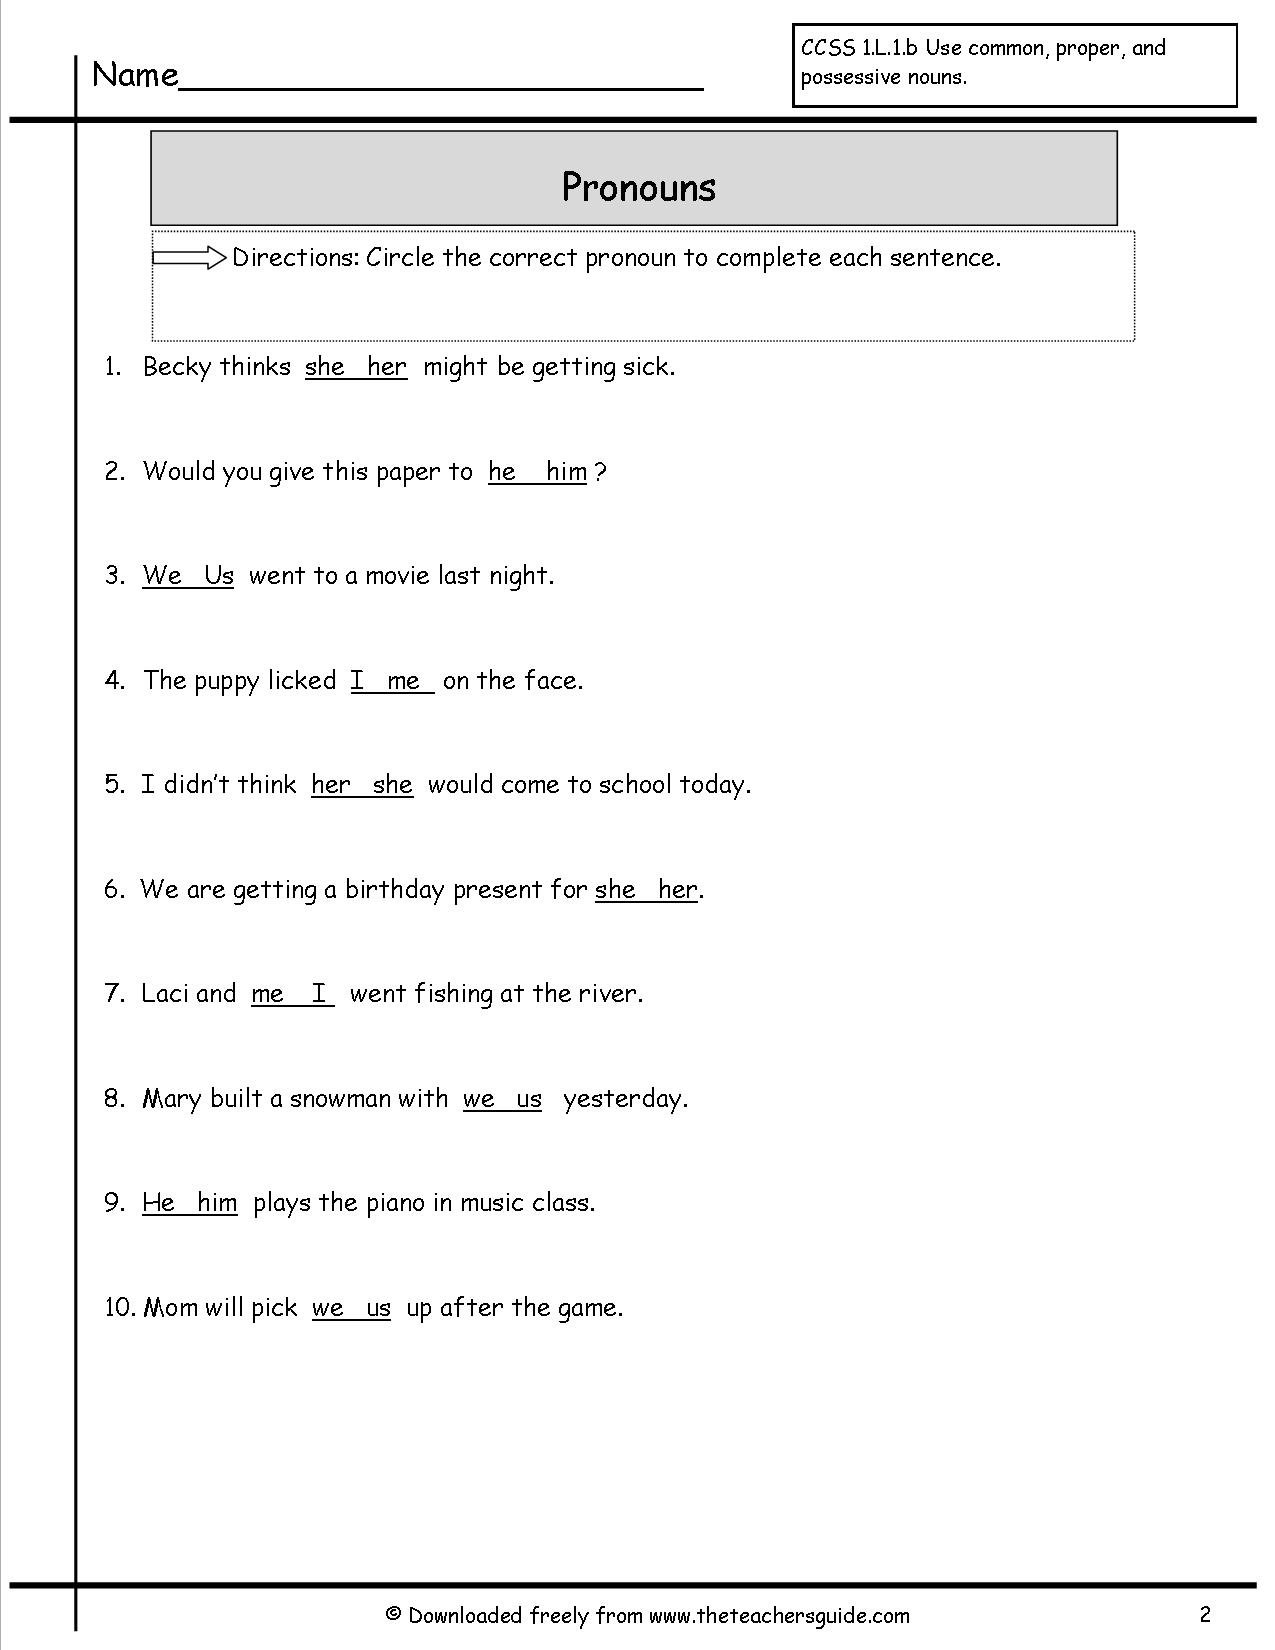 Pronouns Nouns Worksheets From The Teacher s Guide Within Nouns And 